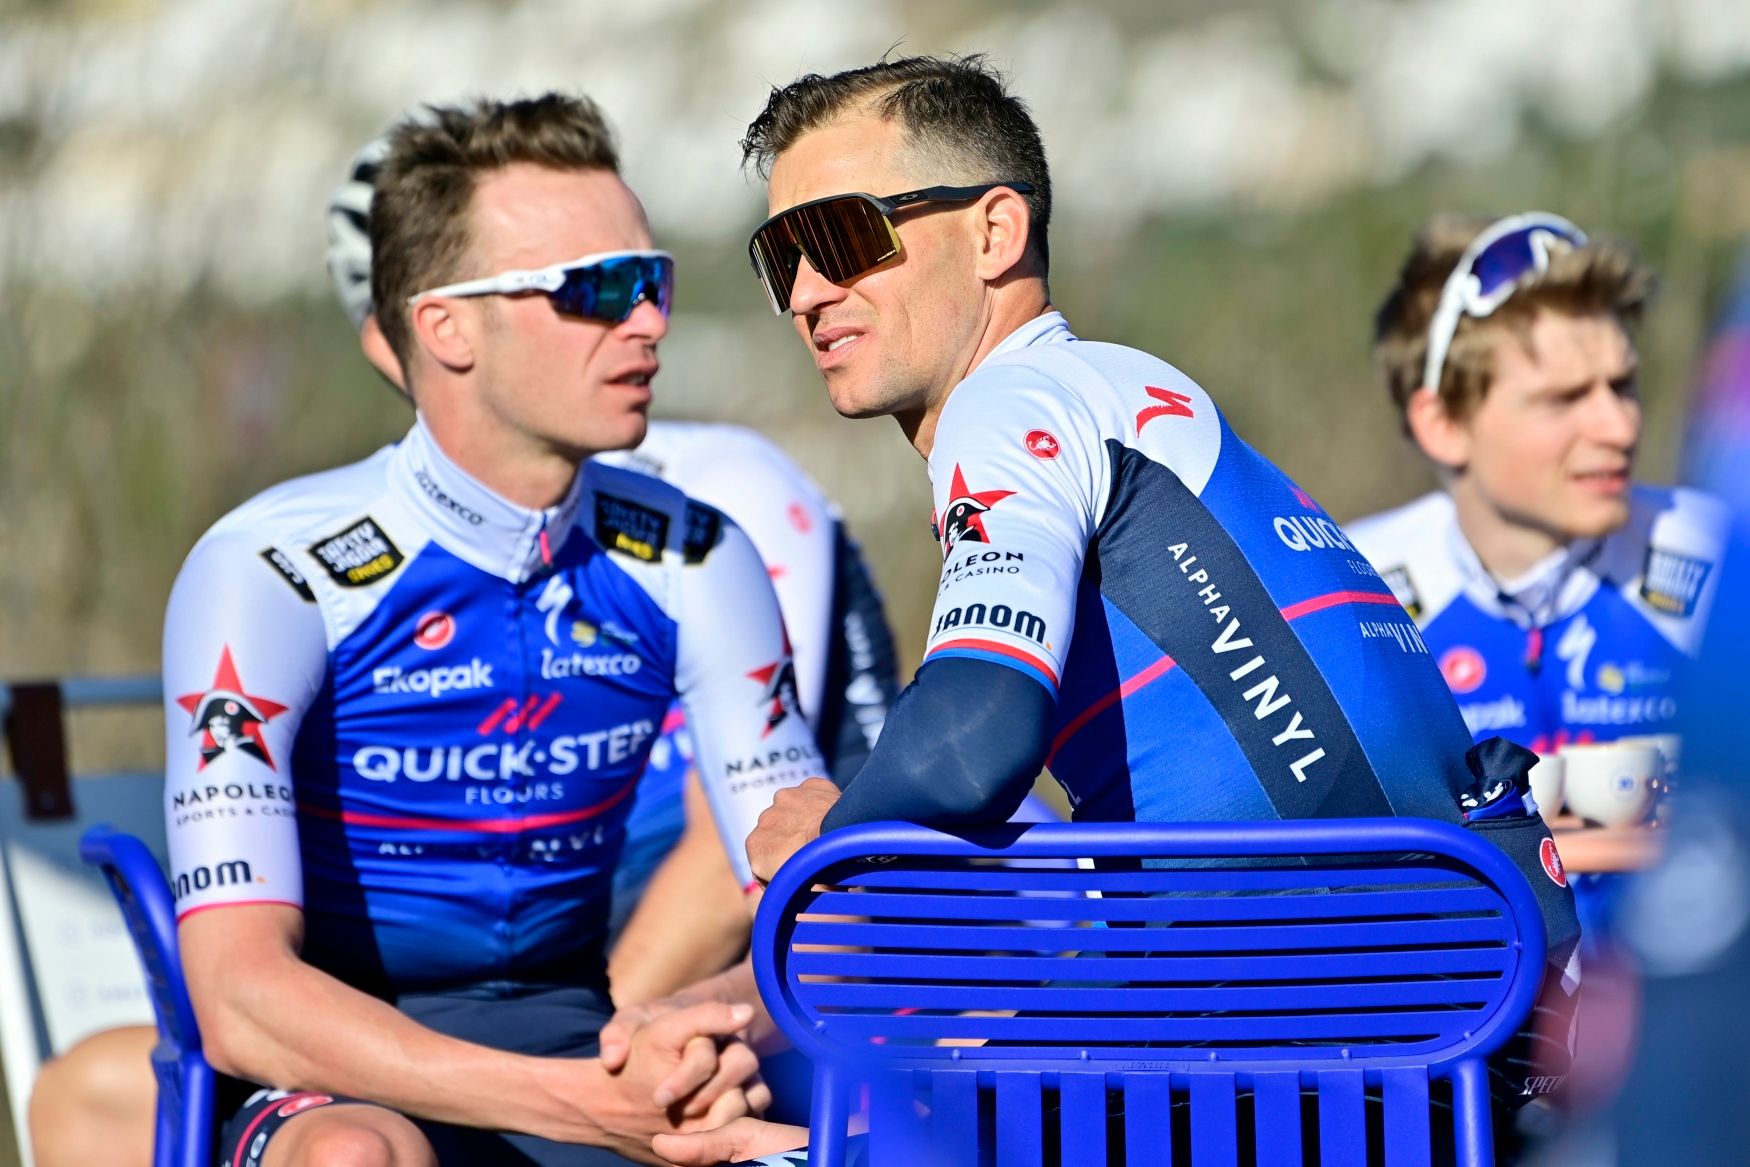 Stybar in Poland unsuccessfully attacked for victory after two and a half years